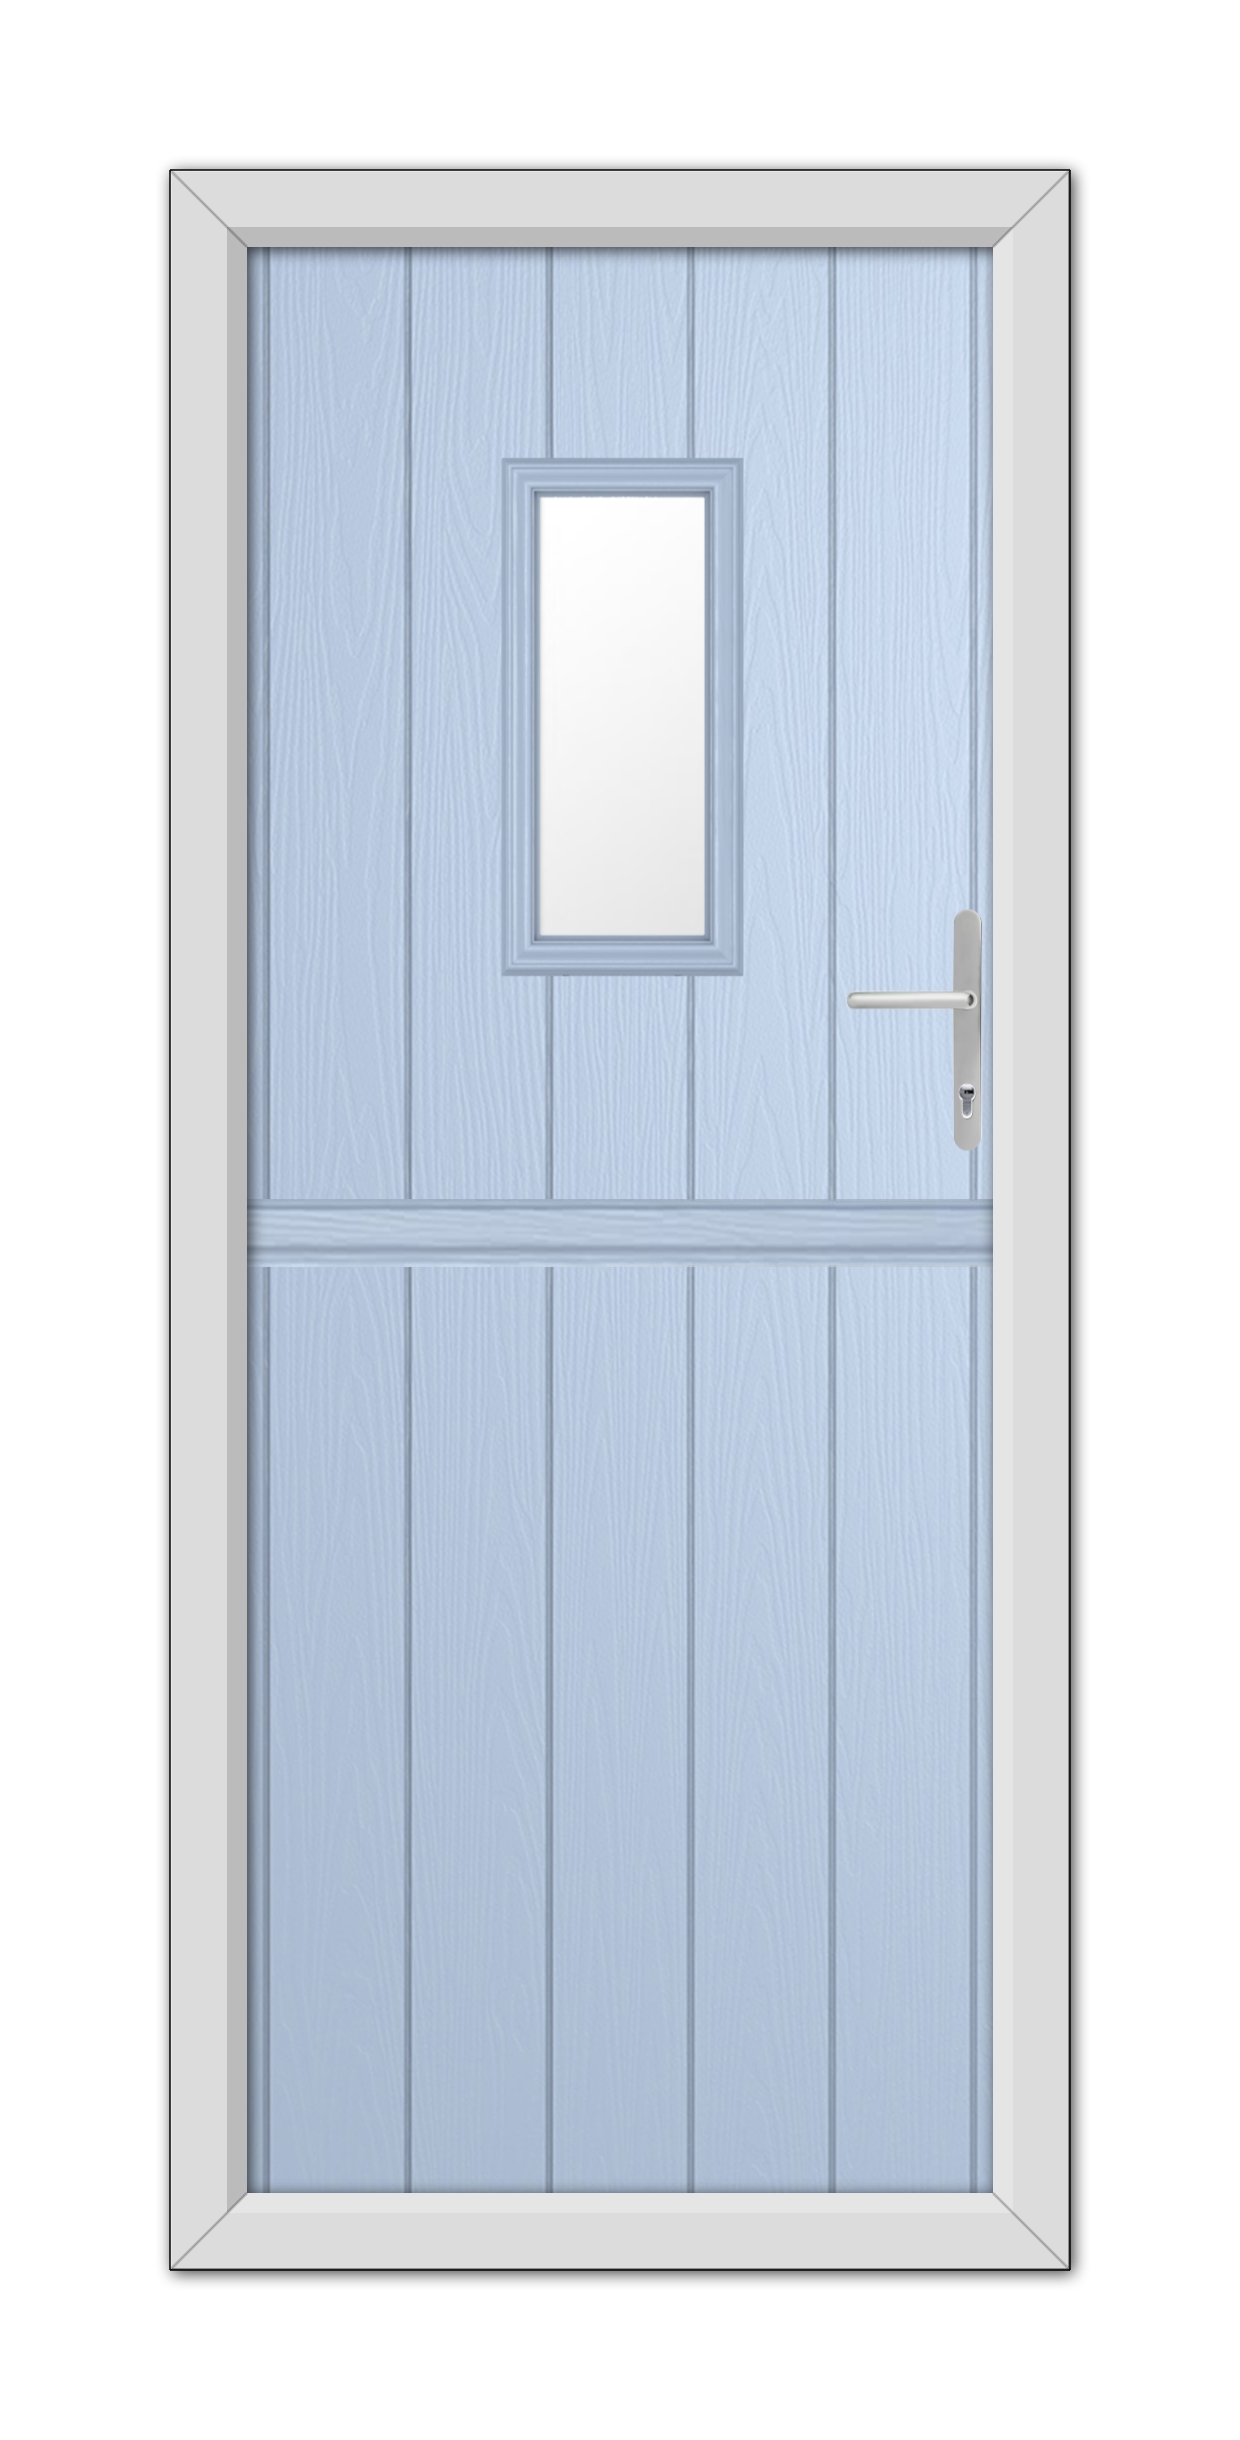 Duck Egg Blue Somerset Stable Composite Door with a small square window and silver handle, set in a white frame.